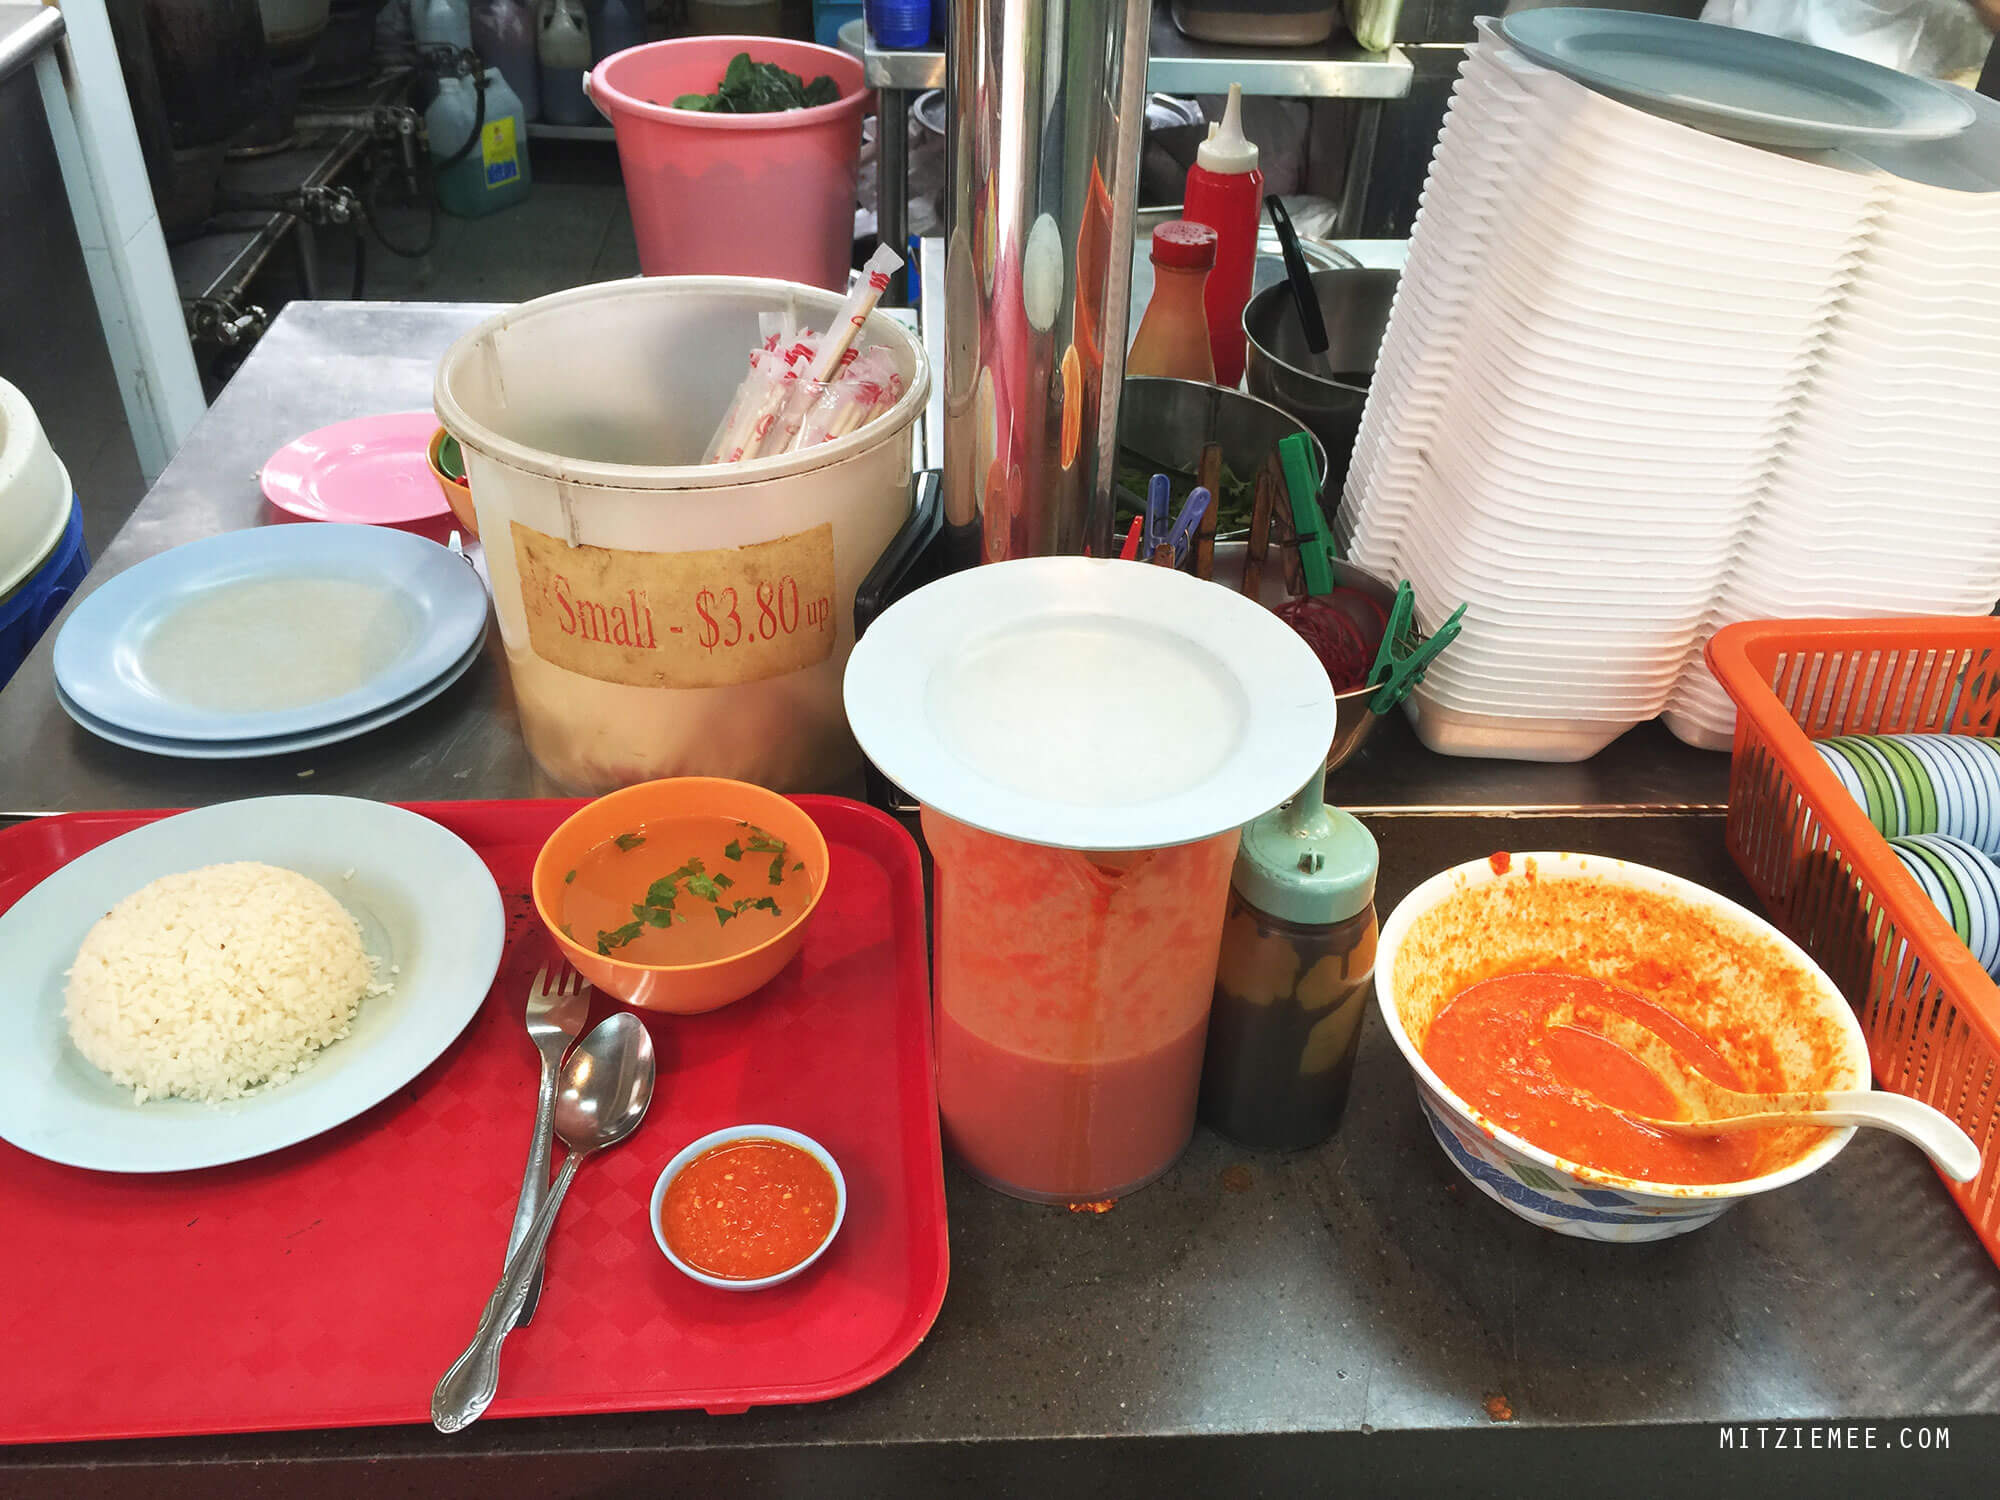 Leong Yeow Famous Waterloo Street Hainanese Chicken Rice in Singapore